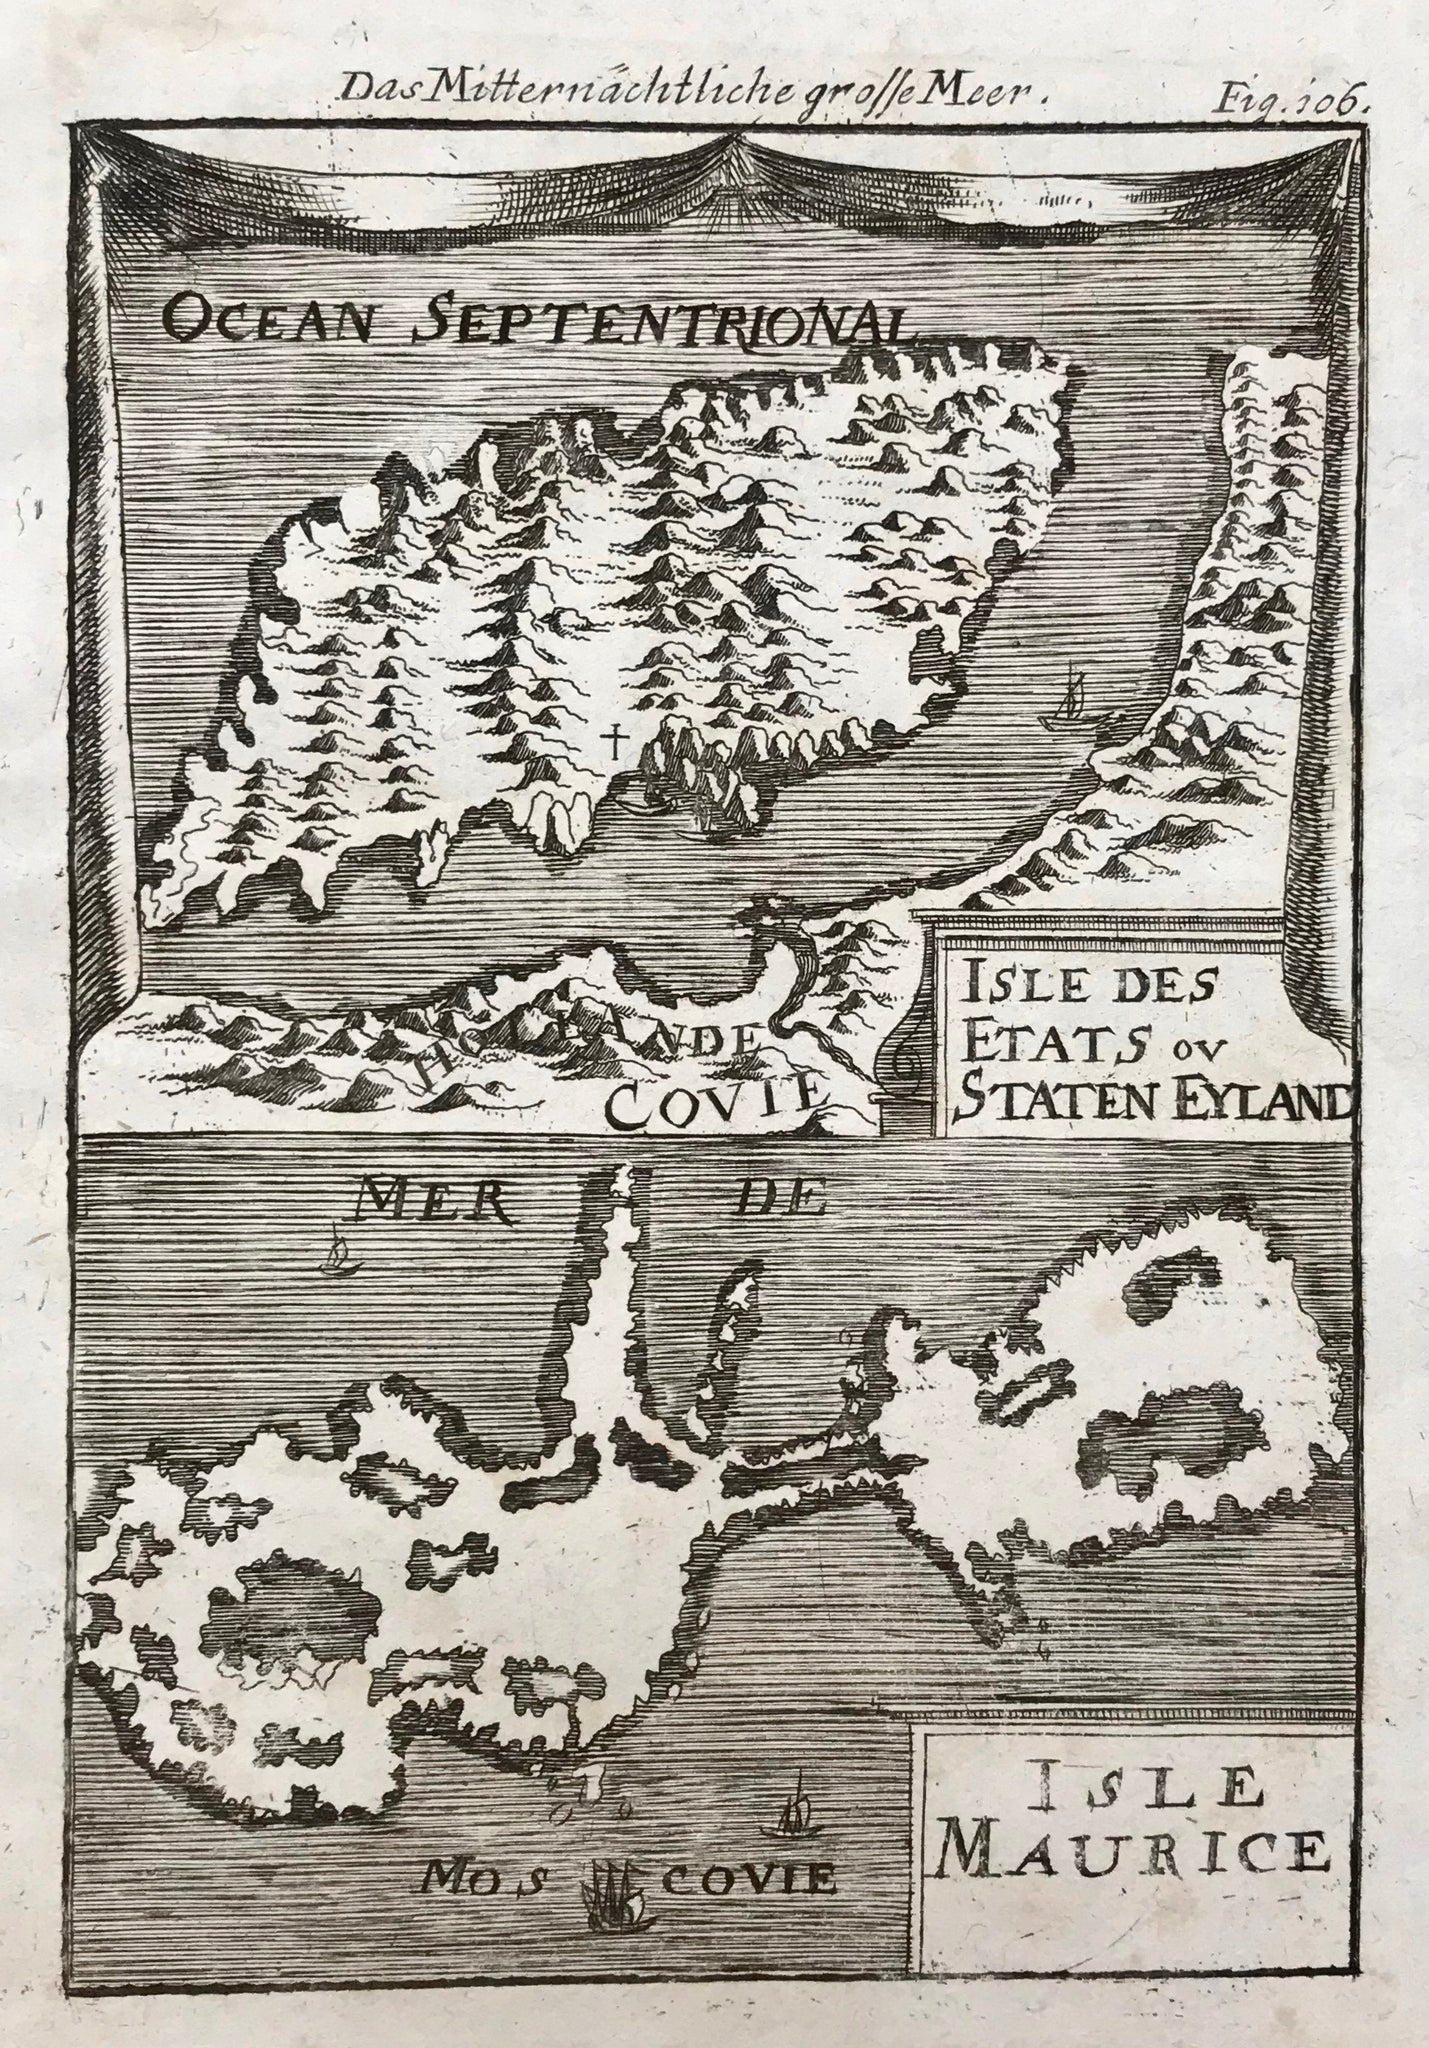 Russia, Das Mitternaechtliche grosse Meer. - Isle Des Etats ou Staten Eyland. - Isle Maurice.  Copper engraving by Allain Amallet, 1719. Shows the islands to the north of Lapland and Russia.